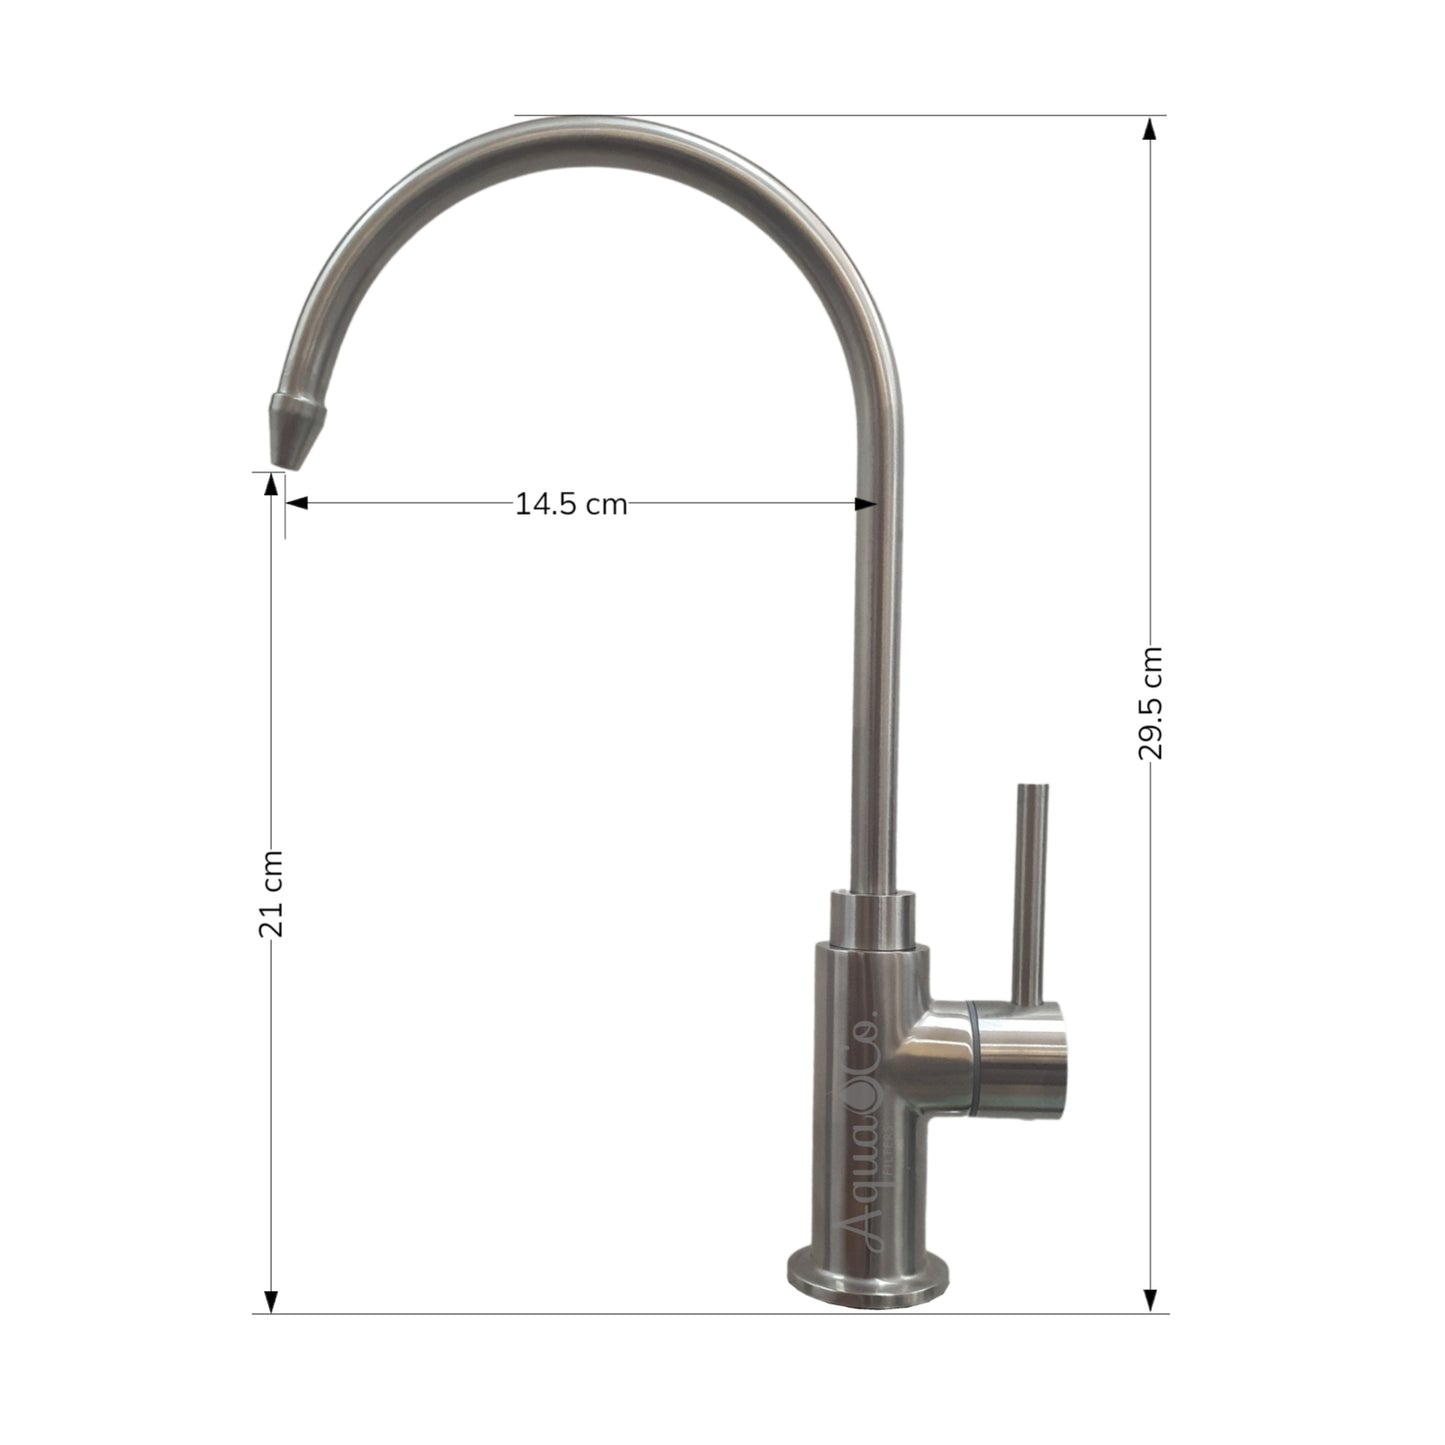 AquaCo Stainless Steel Water Filter Tap - Model: TAP-HL-SS